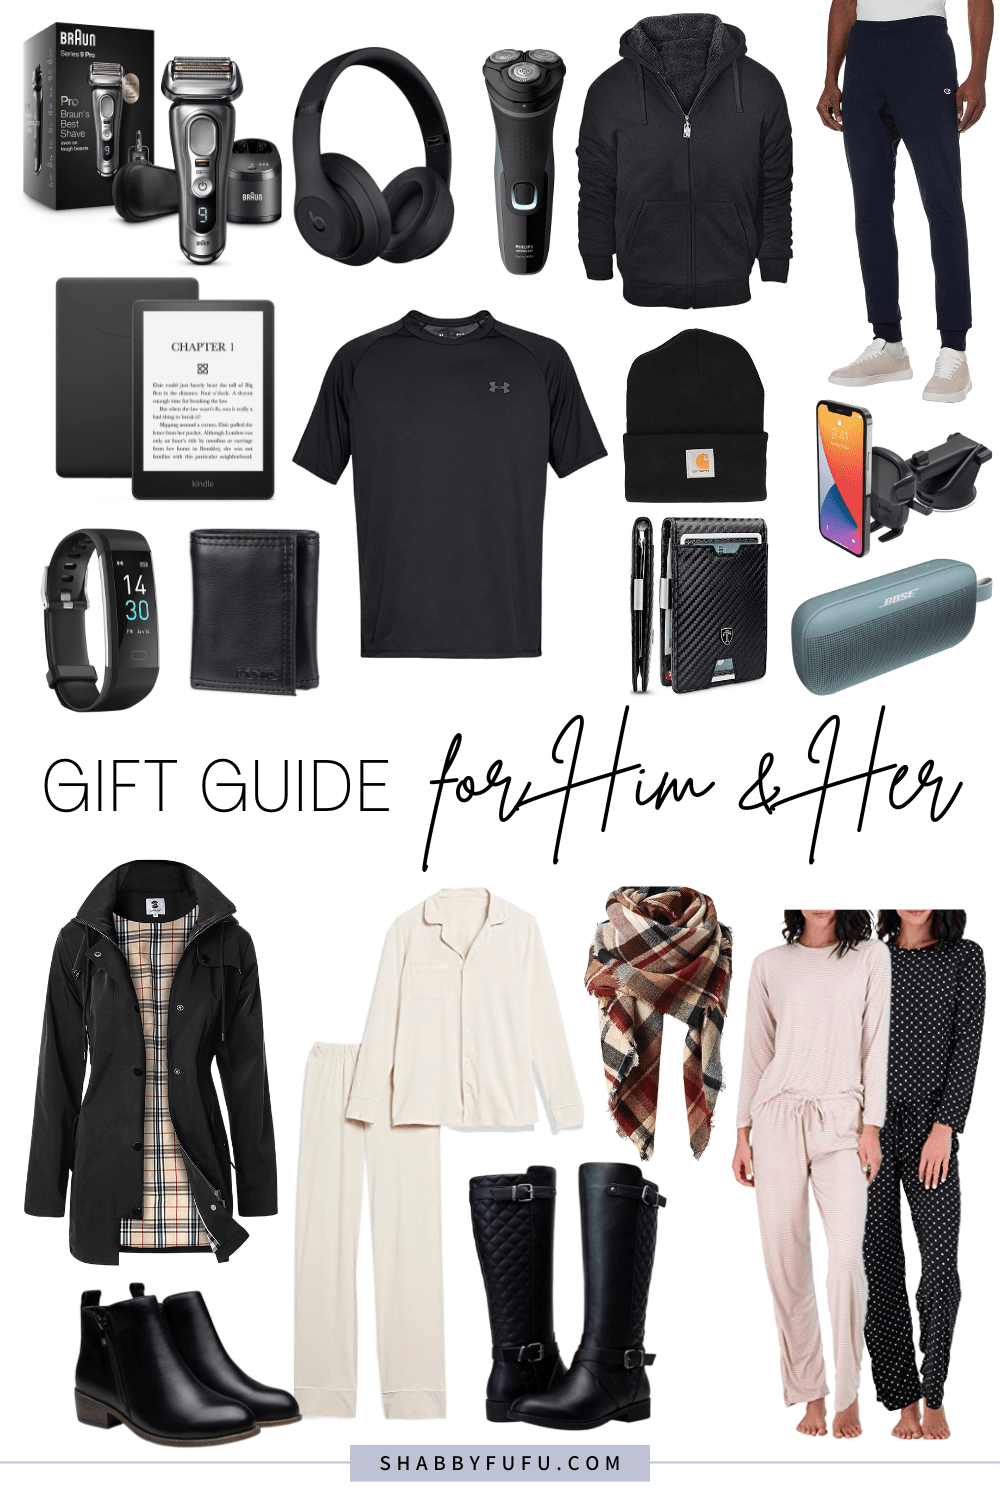 The Ultimate Gift Guide for Him & Her